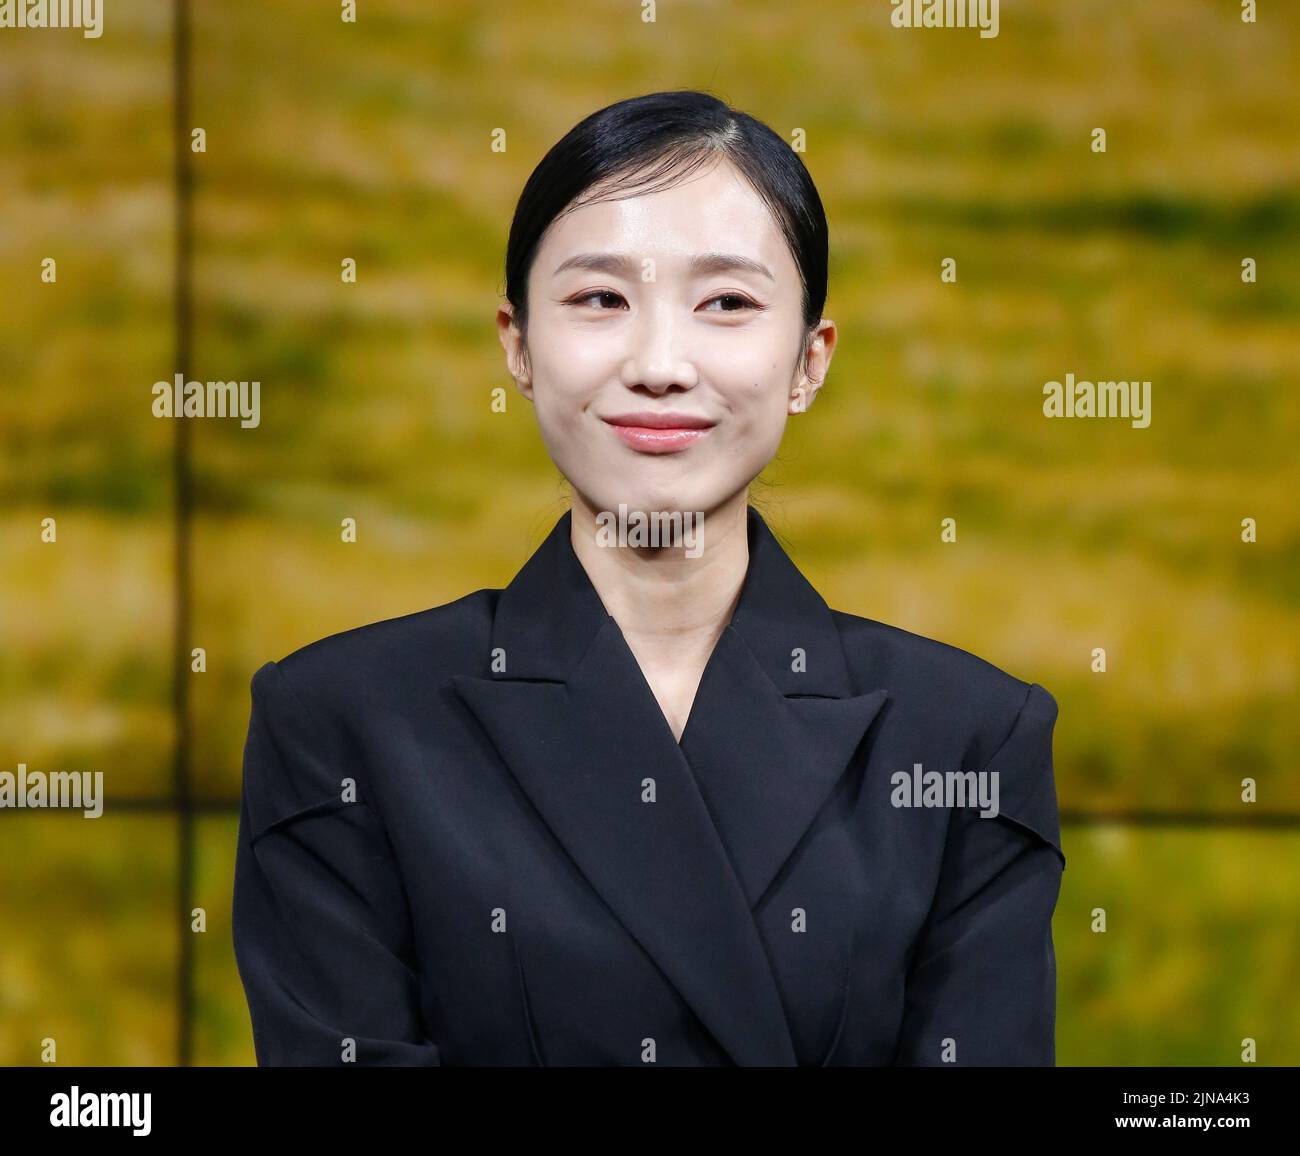 Park Ji-Yeon, August 9, 2022 : South Korean actress Park Ji-Yeon attends a production press conference for upcoming Netflix original series 'A Model Family' in Seoul, South Korea. Credit: Lee Jae-Won/AFLO/Alamy Live News Stock Photo